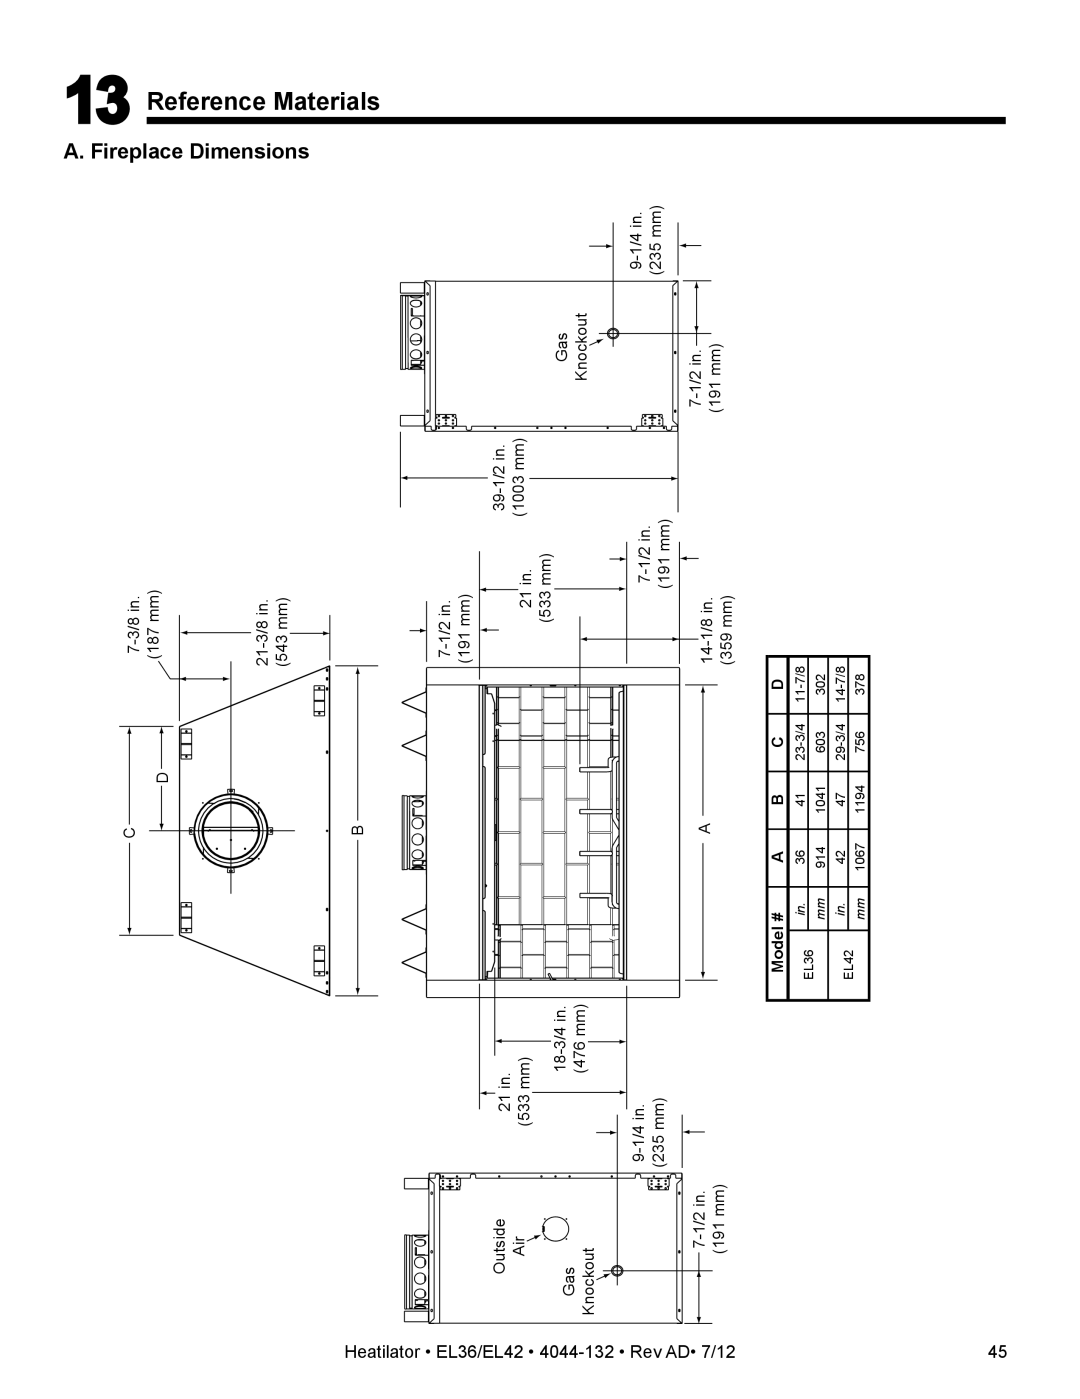 Hearth and Home Technologies EL42, EL36 owner manual Fireplace Dimensions, Reference Materials 